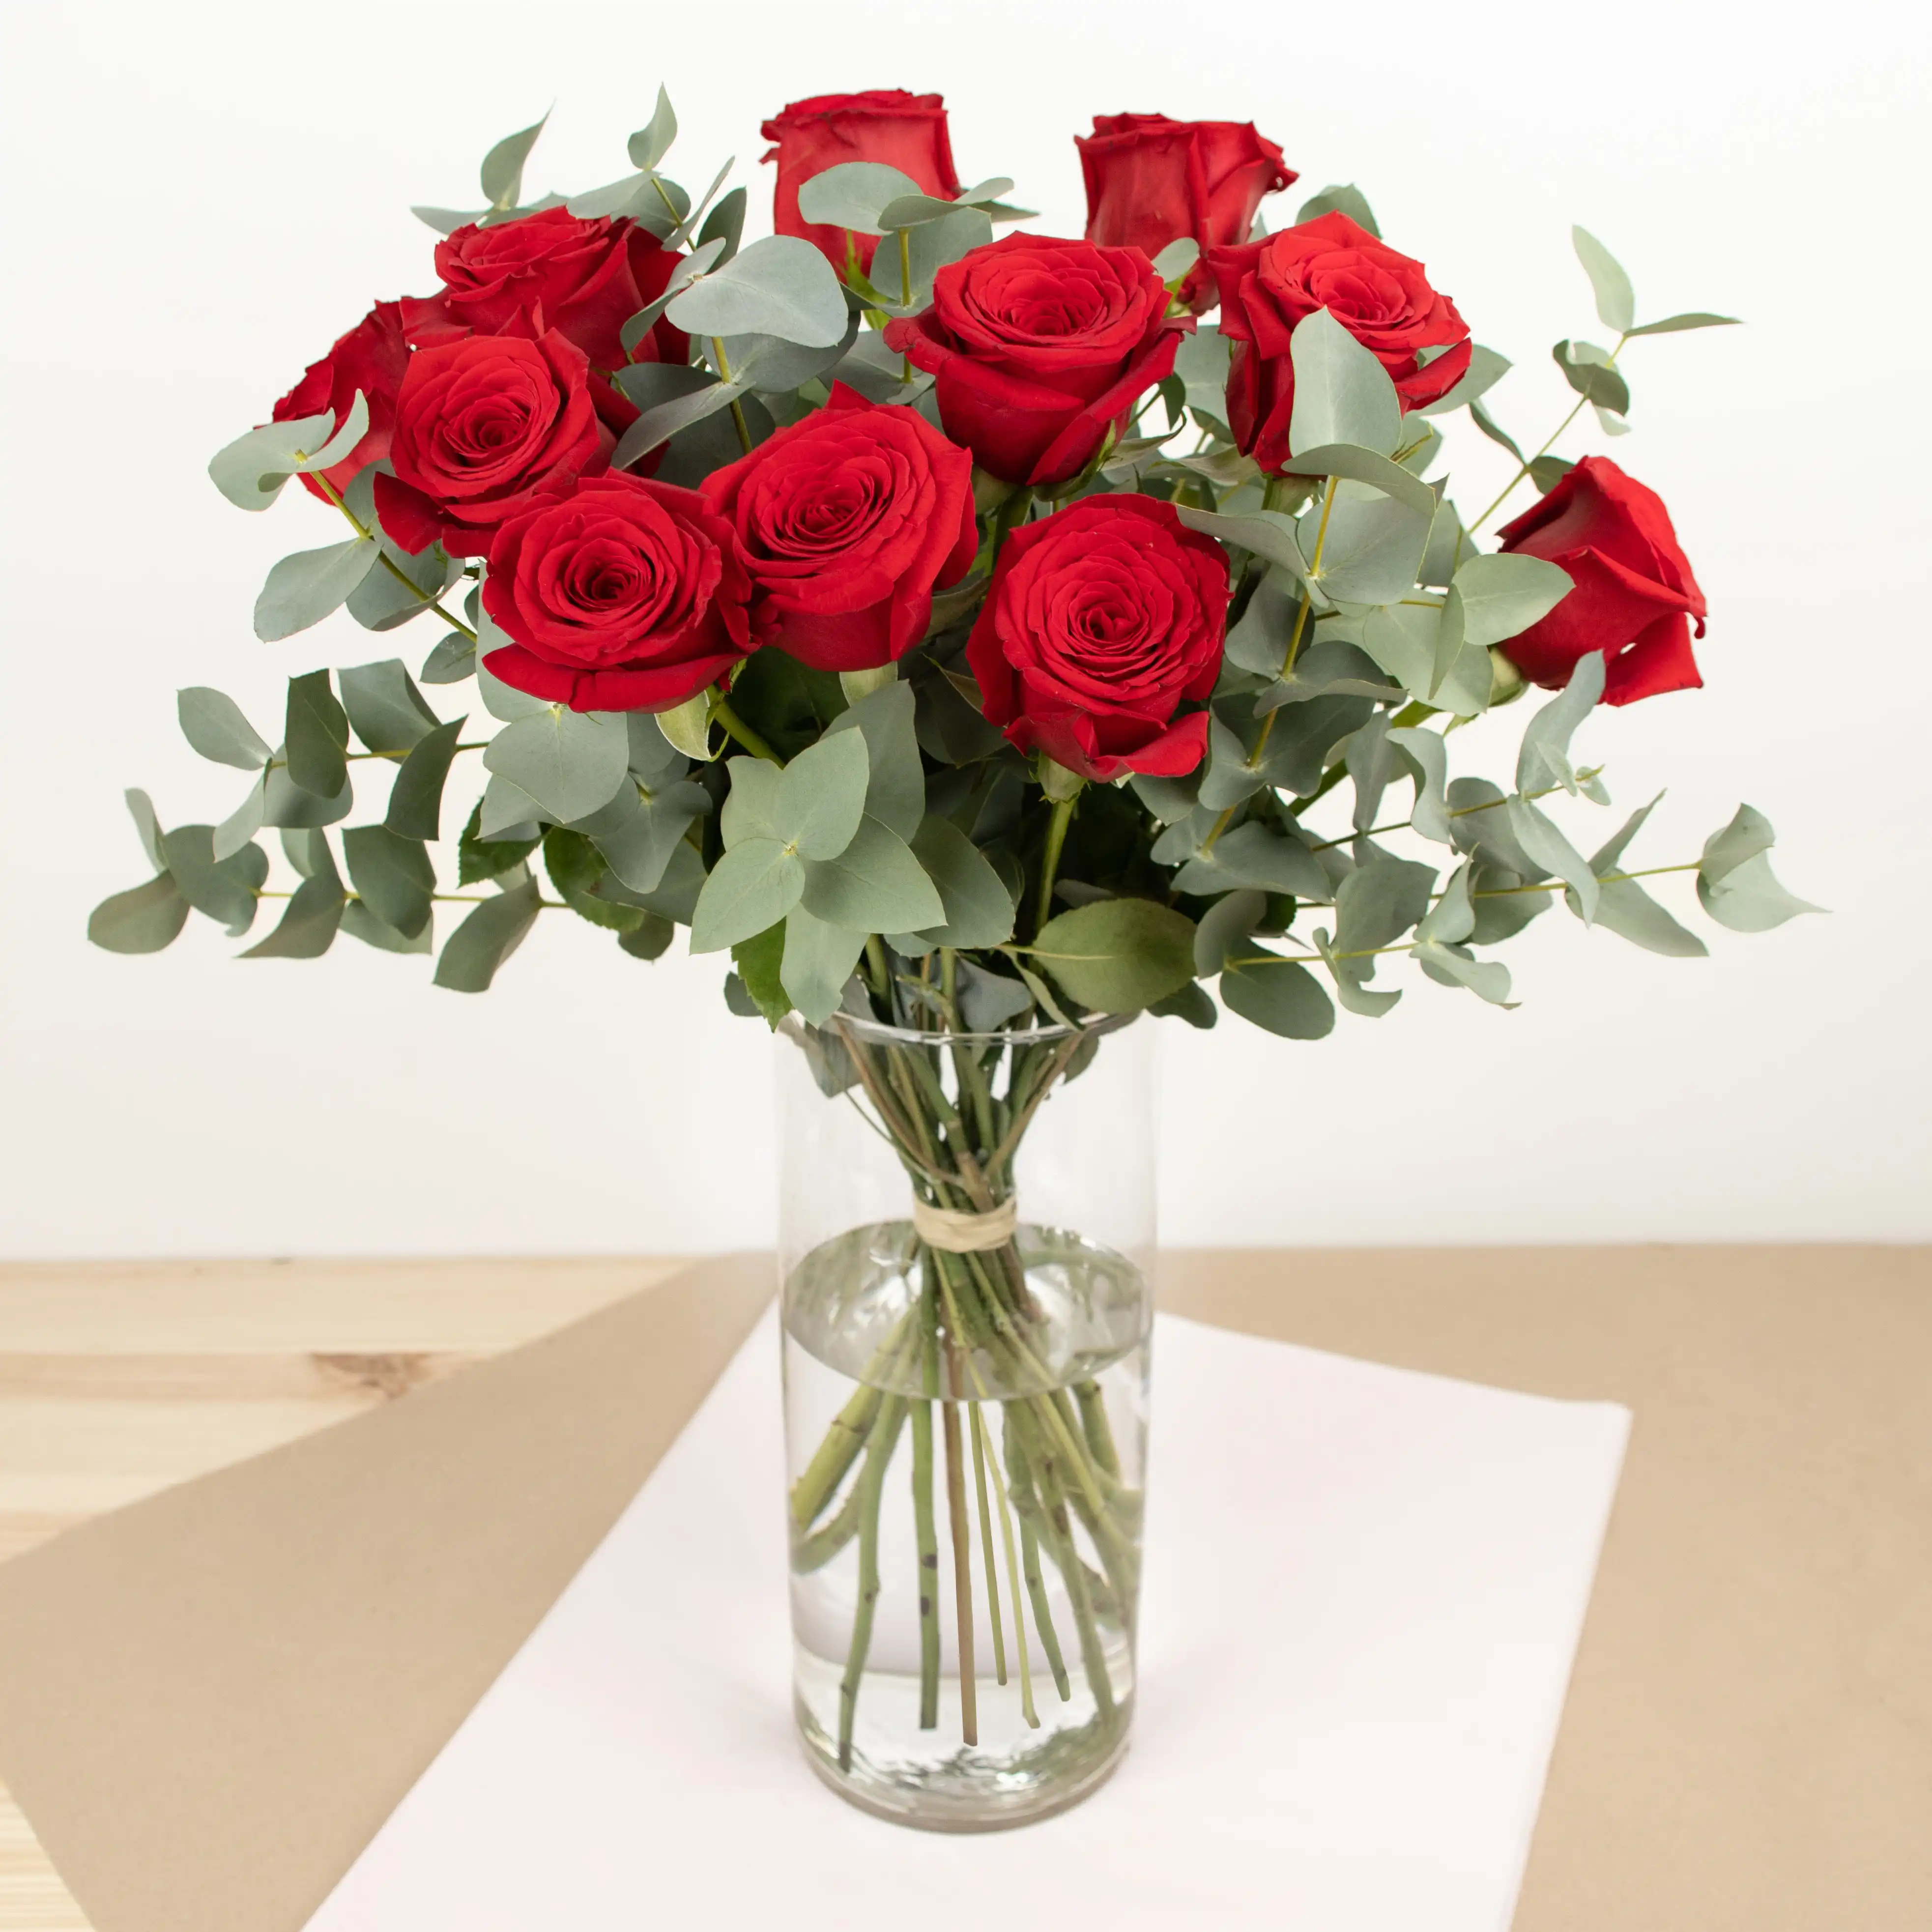 VALENTINE'S FLOWERS - RED ROSES